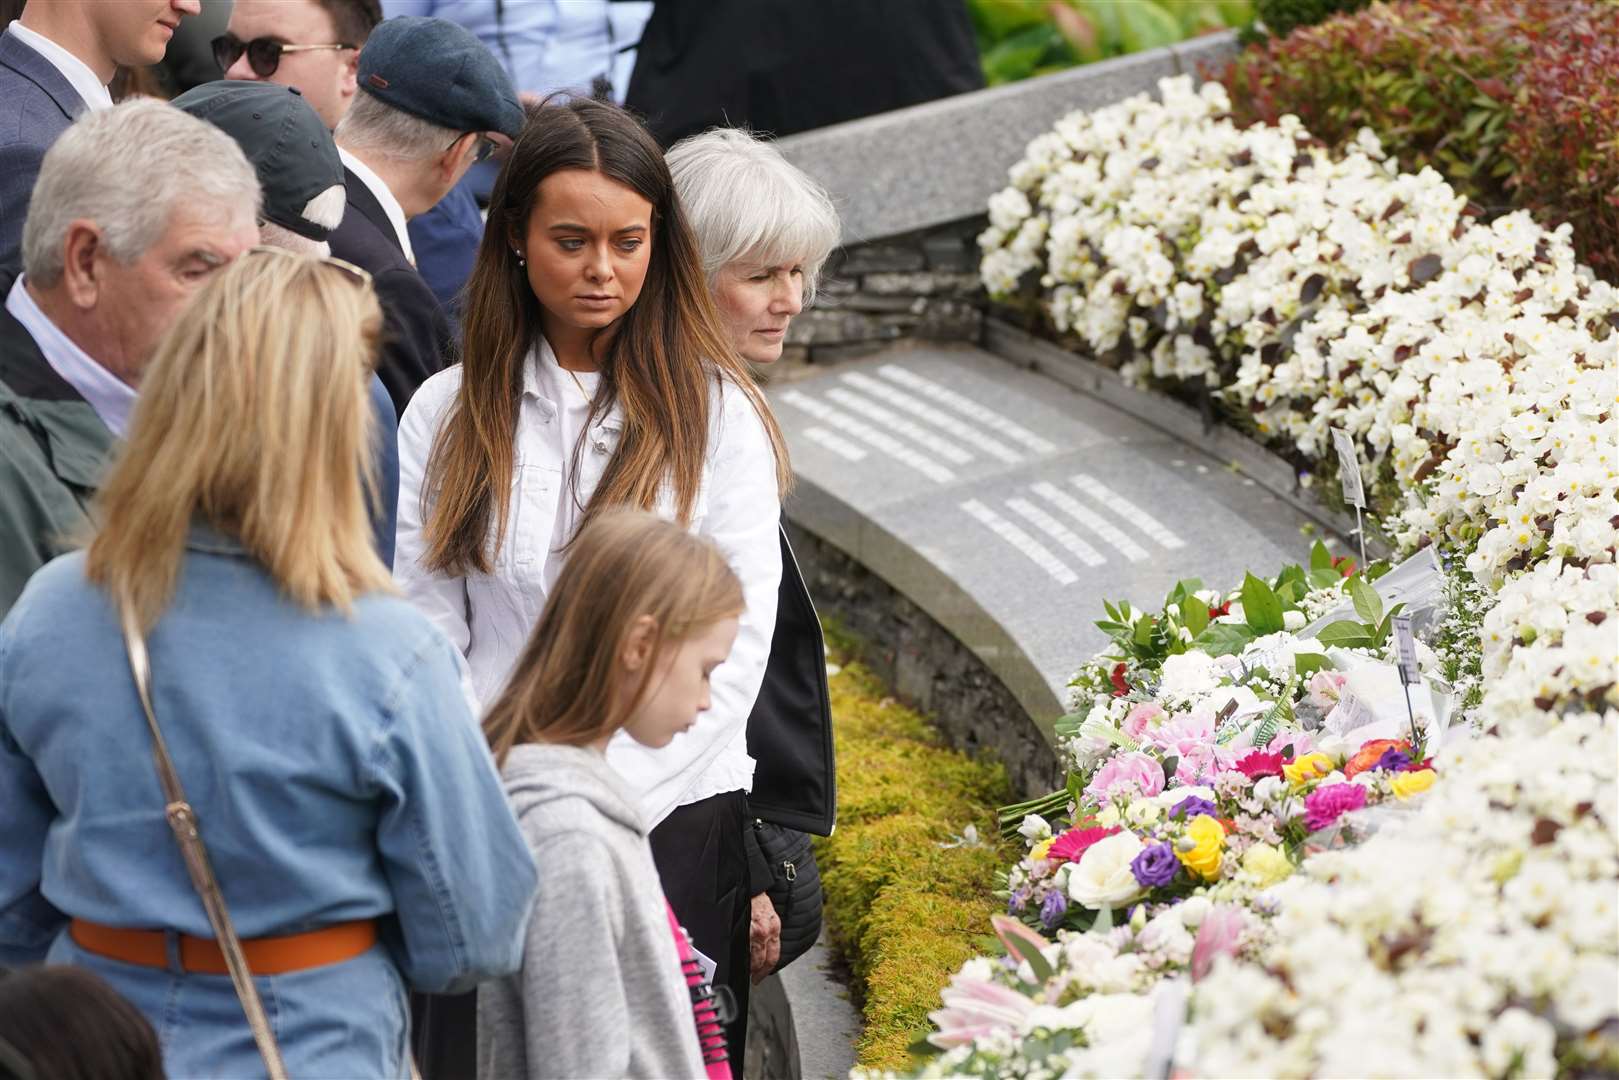 People gather on Sunday following a service to mark the 25th anniversary of the bombing that devastated Omagh in 1998, at the Memorial Gardens in Omagh, Co Tyrone (Brian Lawless/PA)